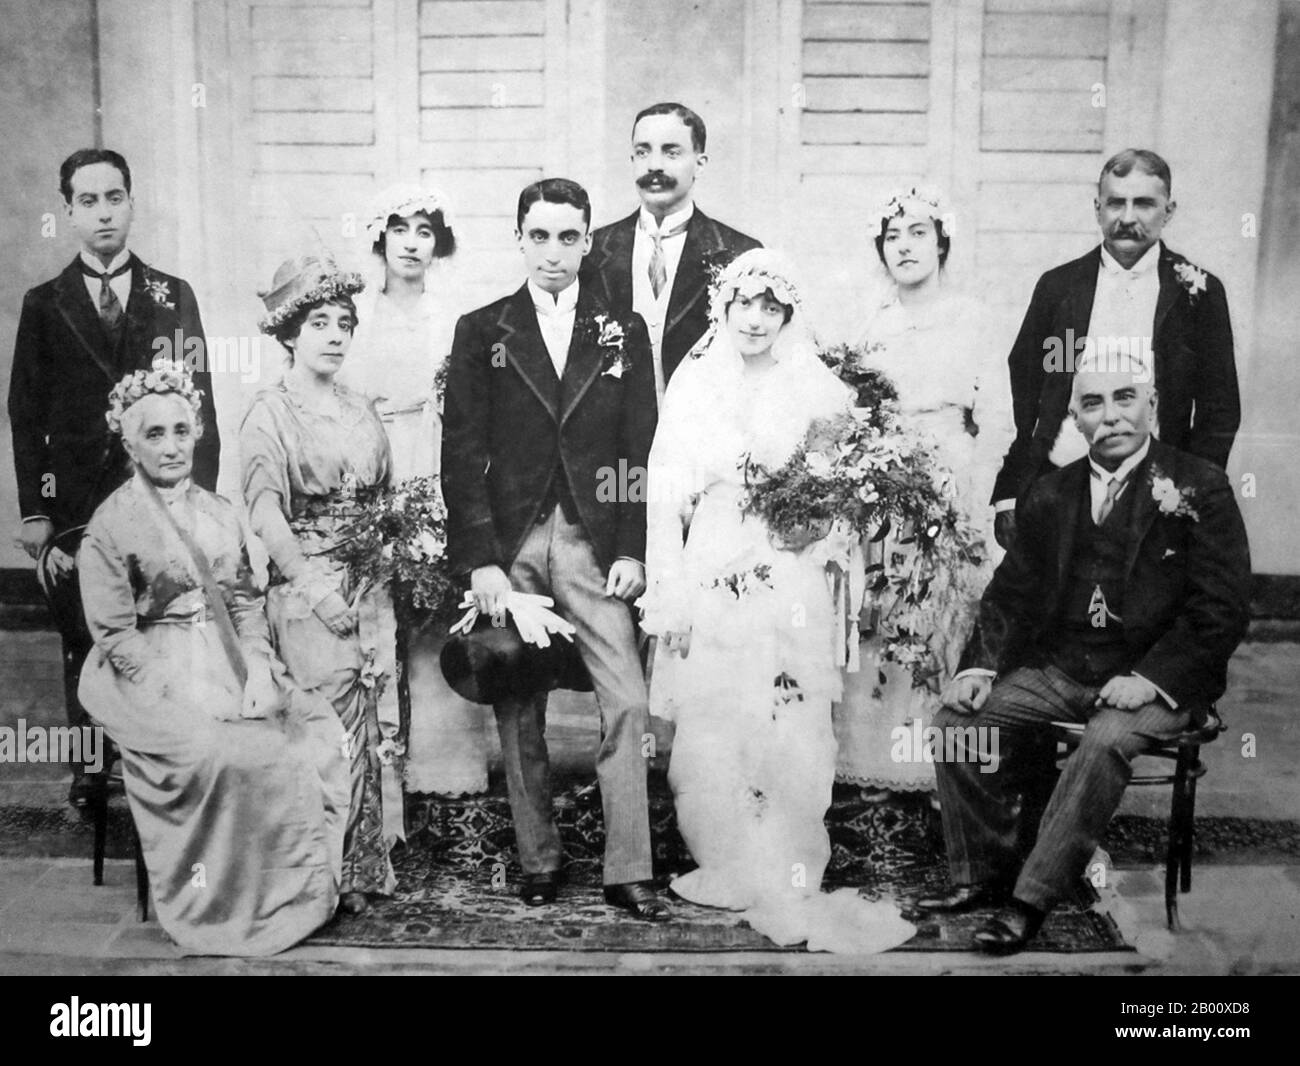 Singapore: A wedding between Singaporeans of Armenian descent, c. 1910.  The Armenians in Singapore, who numbered as many as 100 families at their peak in the 1880s, have now moved on or become part of the wider Singapore community. The Armenian Apostolic Church of St Gregory the Illuminator on Armenian Street, the first church ever built in Singapore, remains today. By the 18th century, Armenian communities had established themselves in India (particularly Kolkata) Myanmar, the Malay Peninsula (particularly Penang and Malacca), and Java. Stock Photo